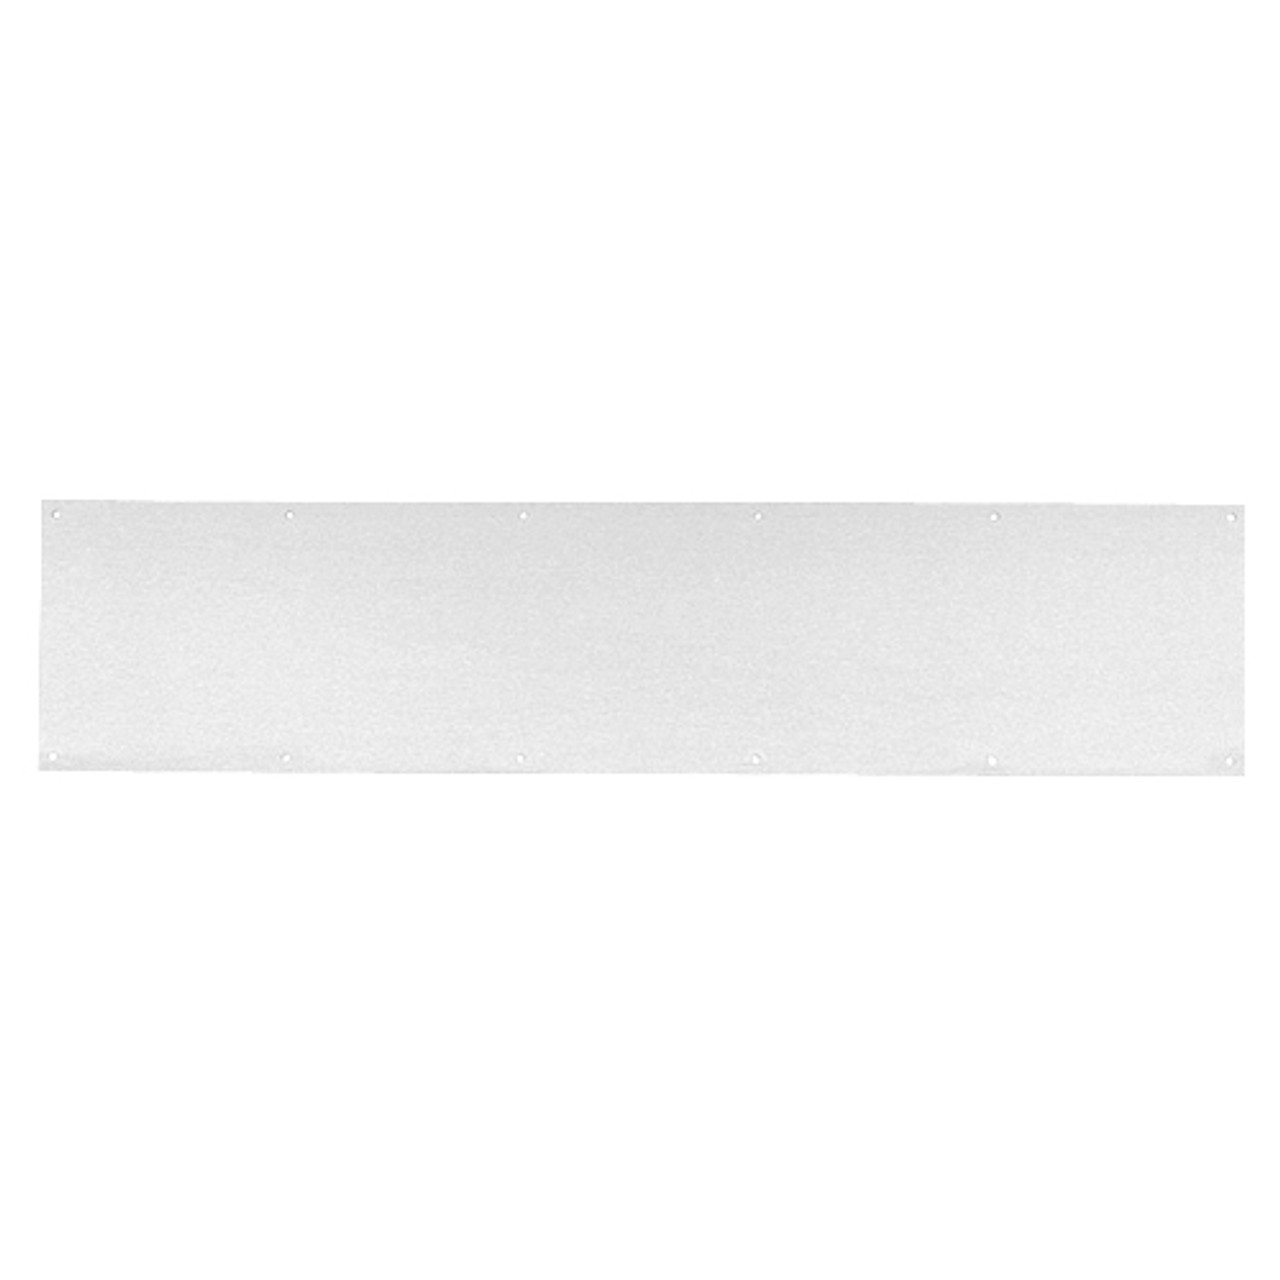 8400-US28-8x35-B-CS Ives 8400 Series Protection Plate in Aluminum